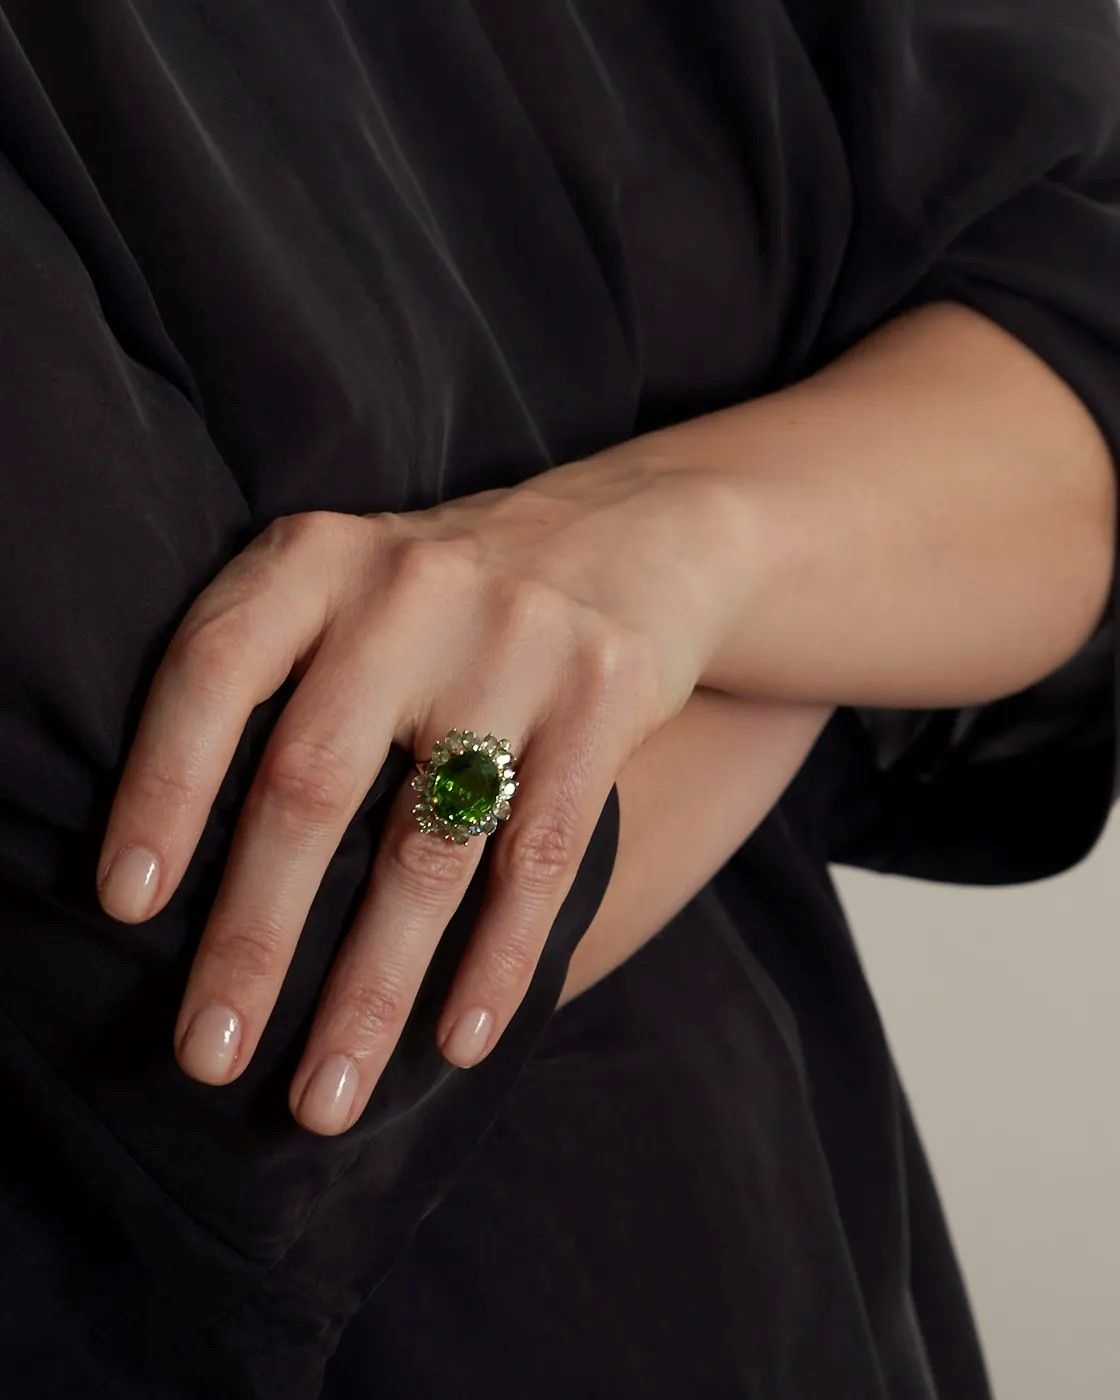 Ring with moldavite and green sapphires